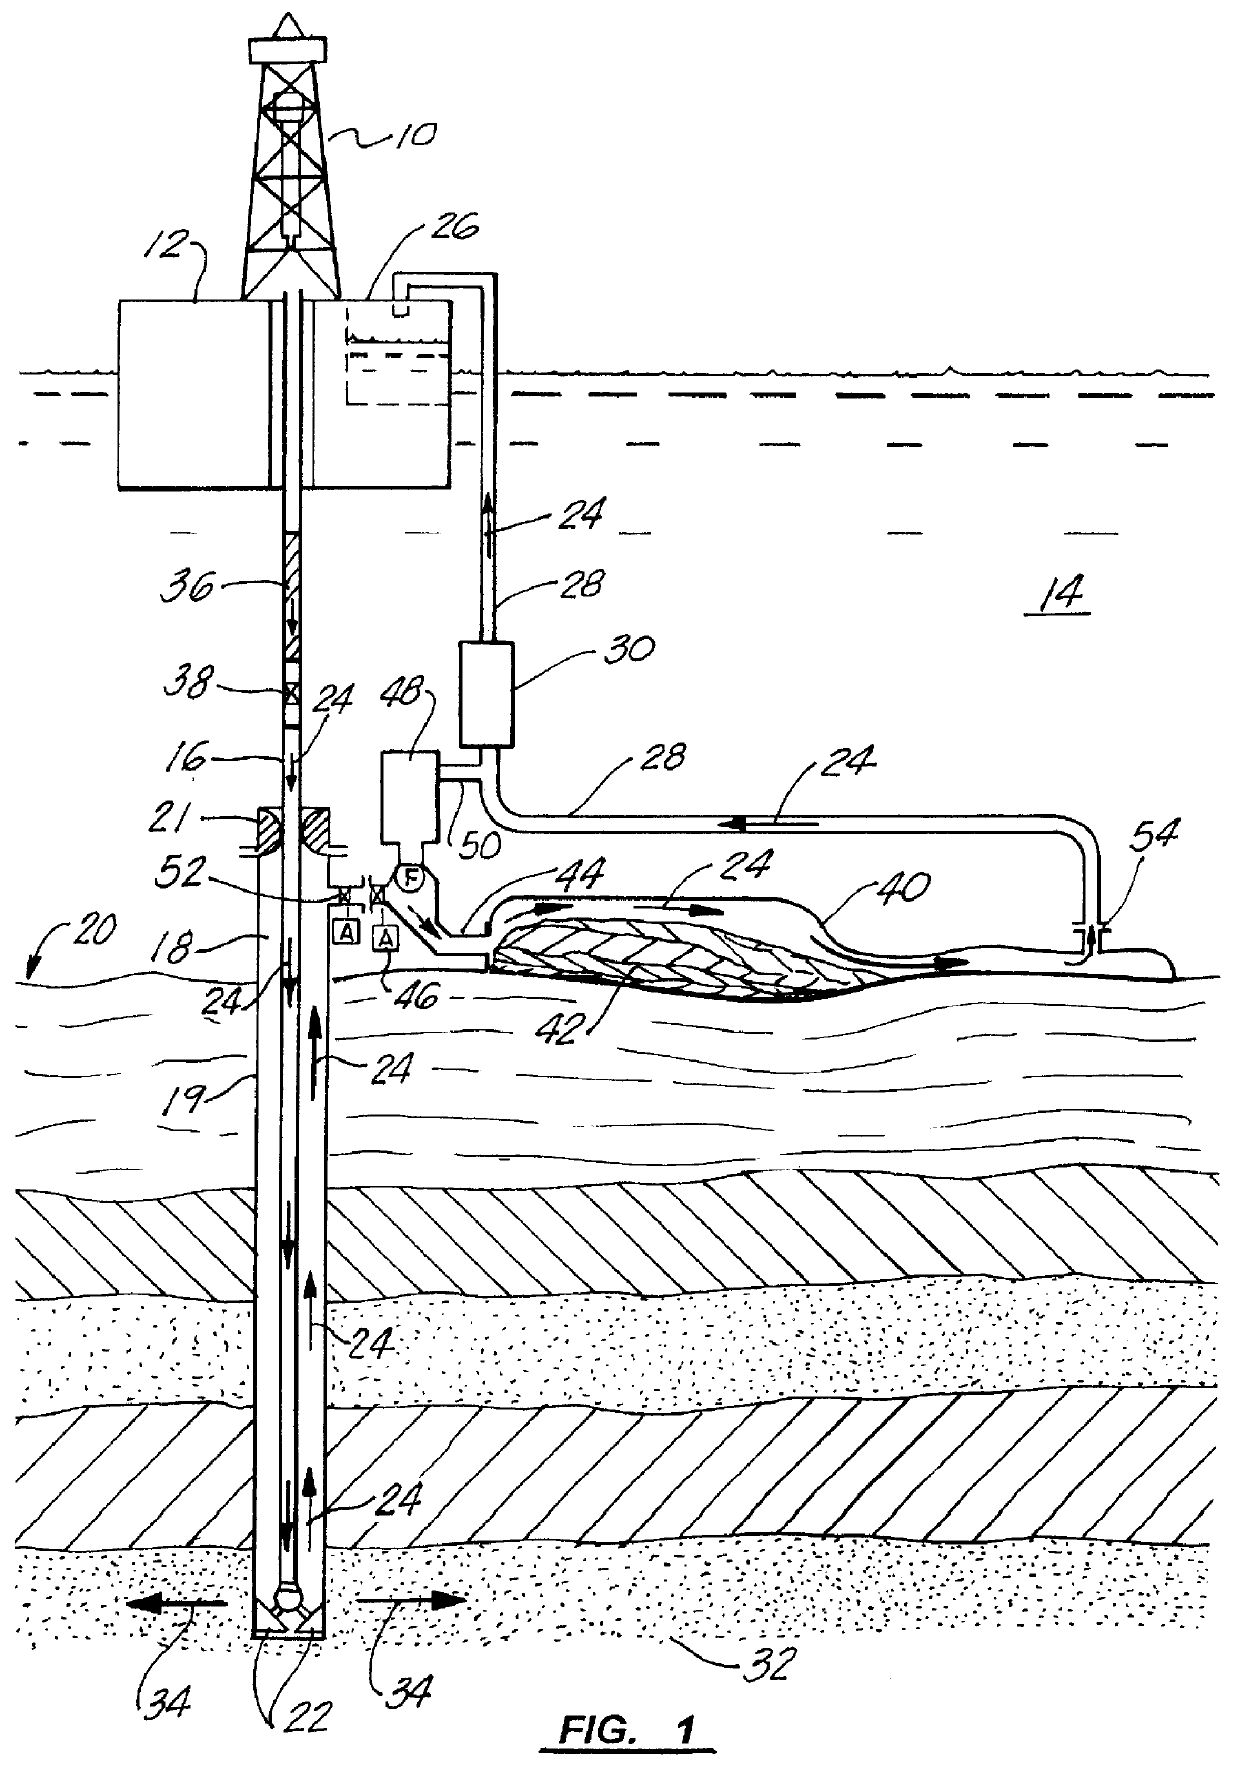 Expandable tank for separating particulate material from drilling fluid and storing production fluids, and method